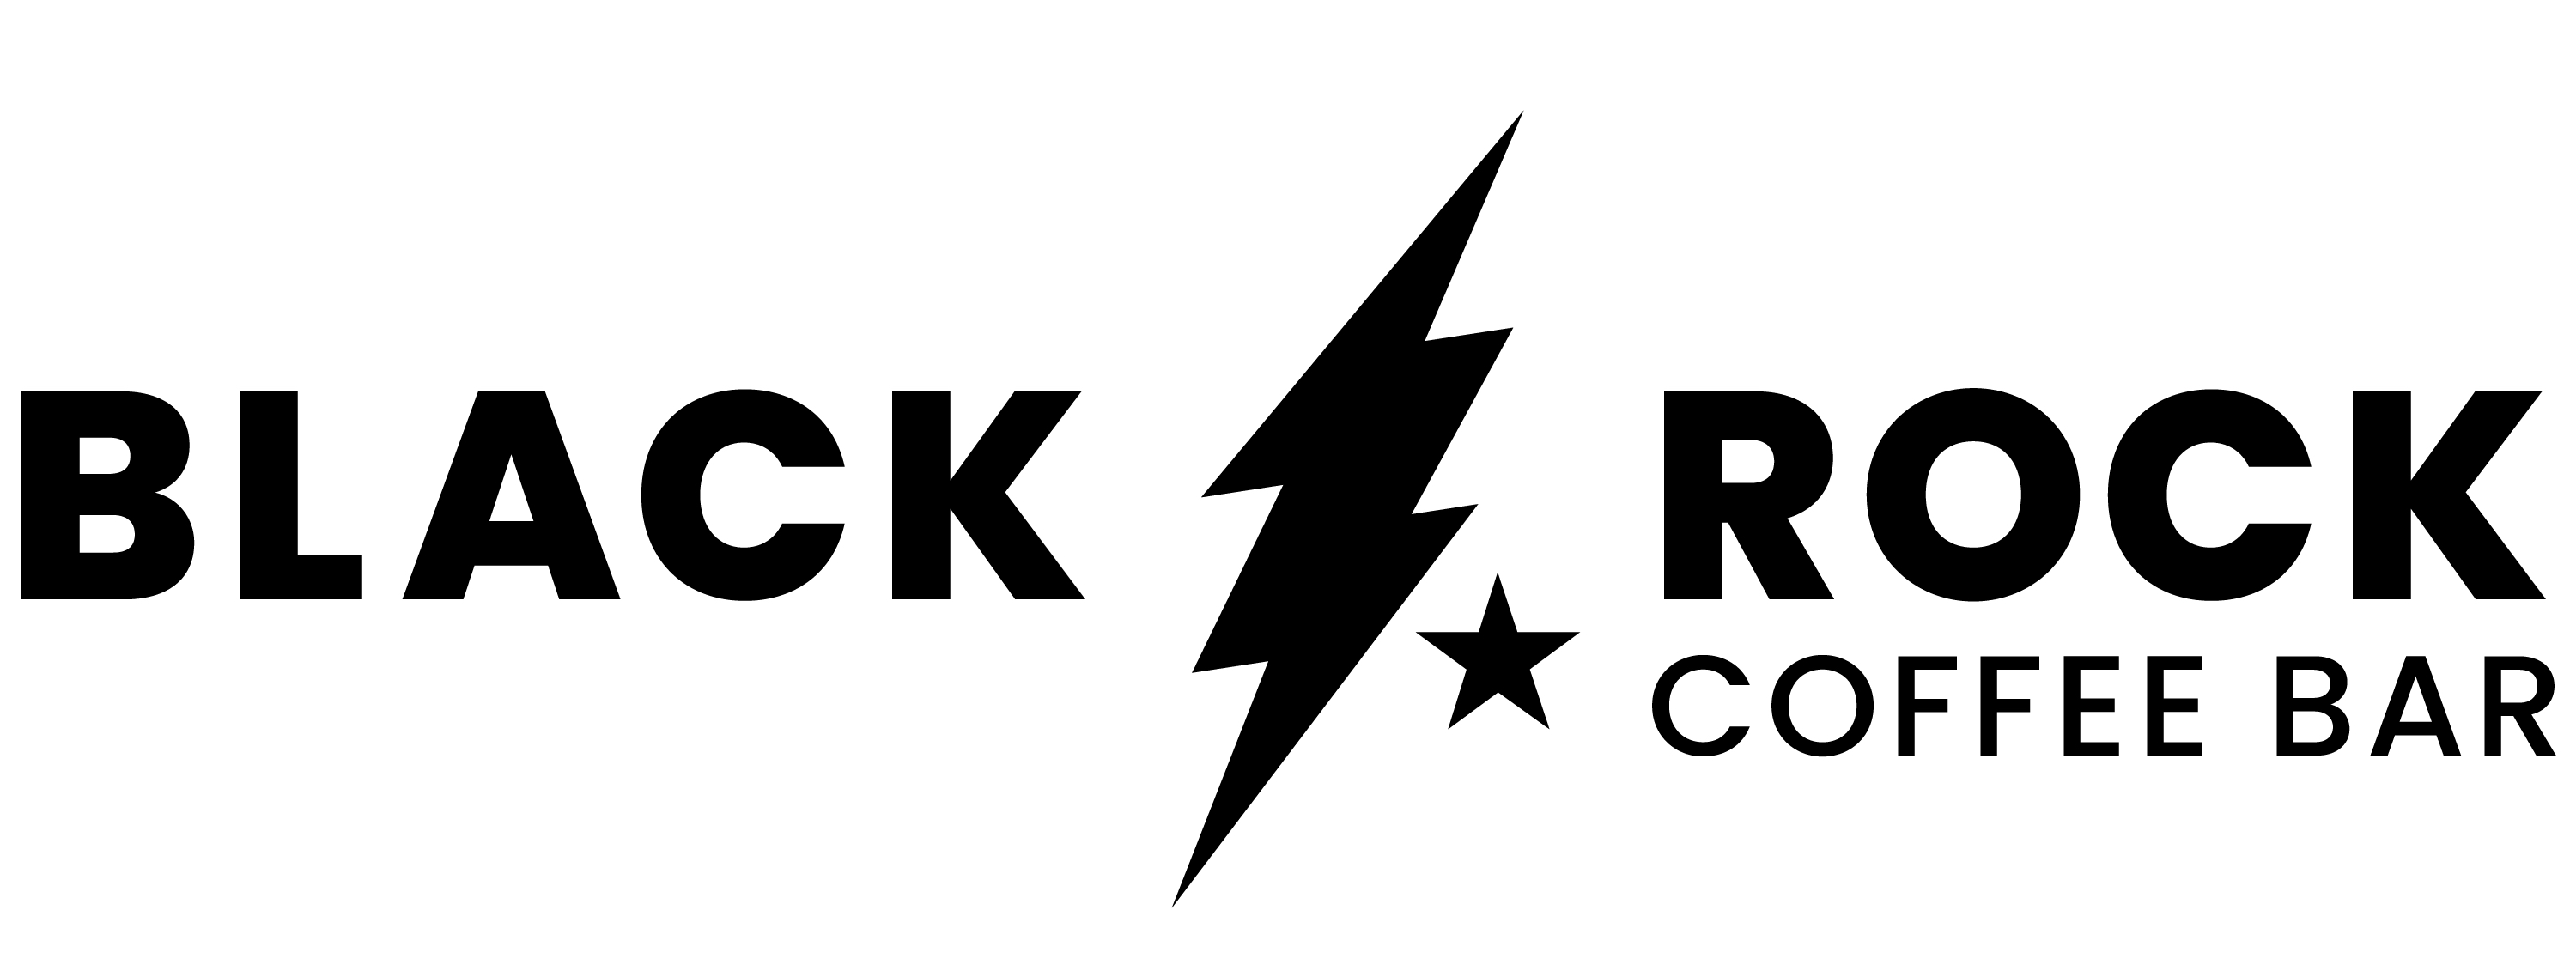 Black Rock Coffee Bar Maintains its Steady Growth in Arizona: Opens Fourth Store in Gilbert and 37th in the State